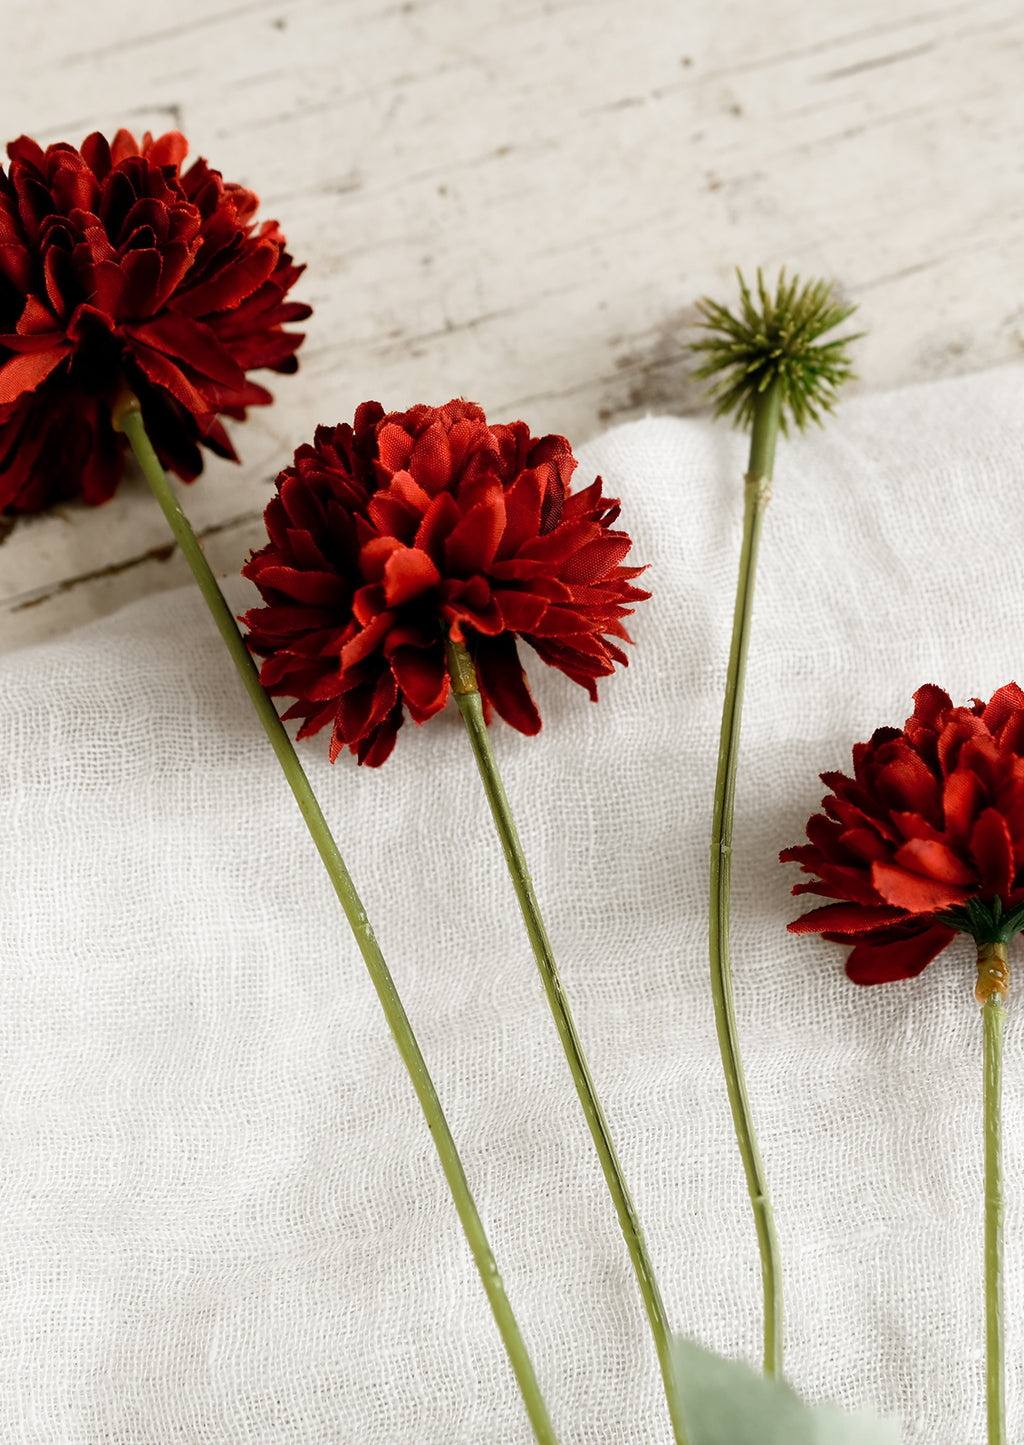 2: An artificial flower spray in the style of a red mum.